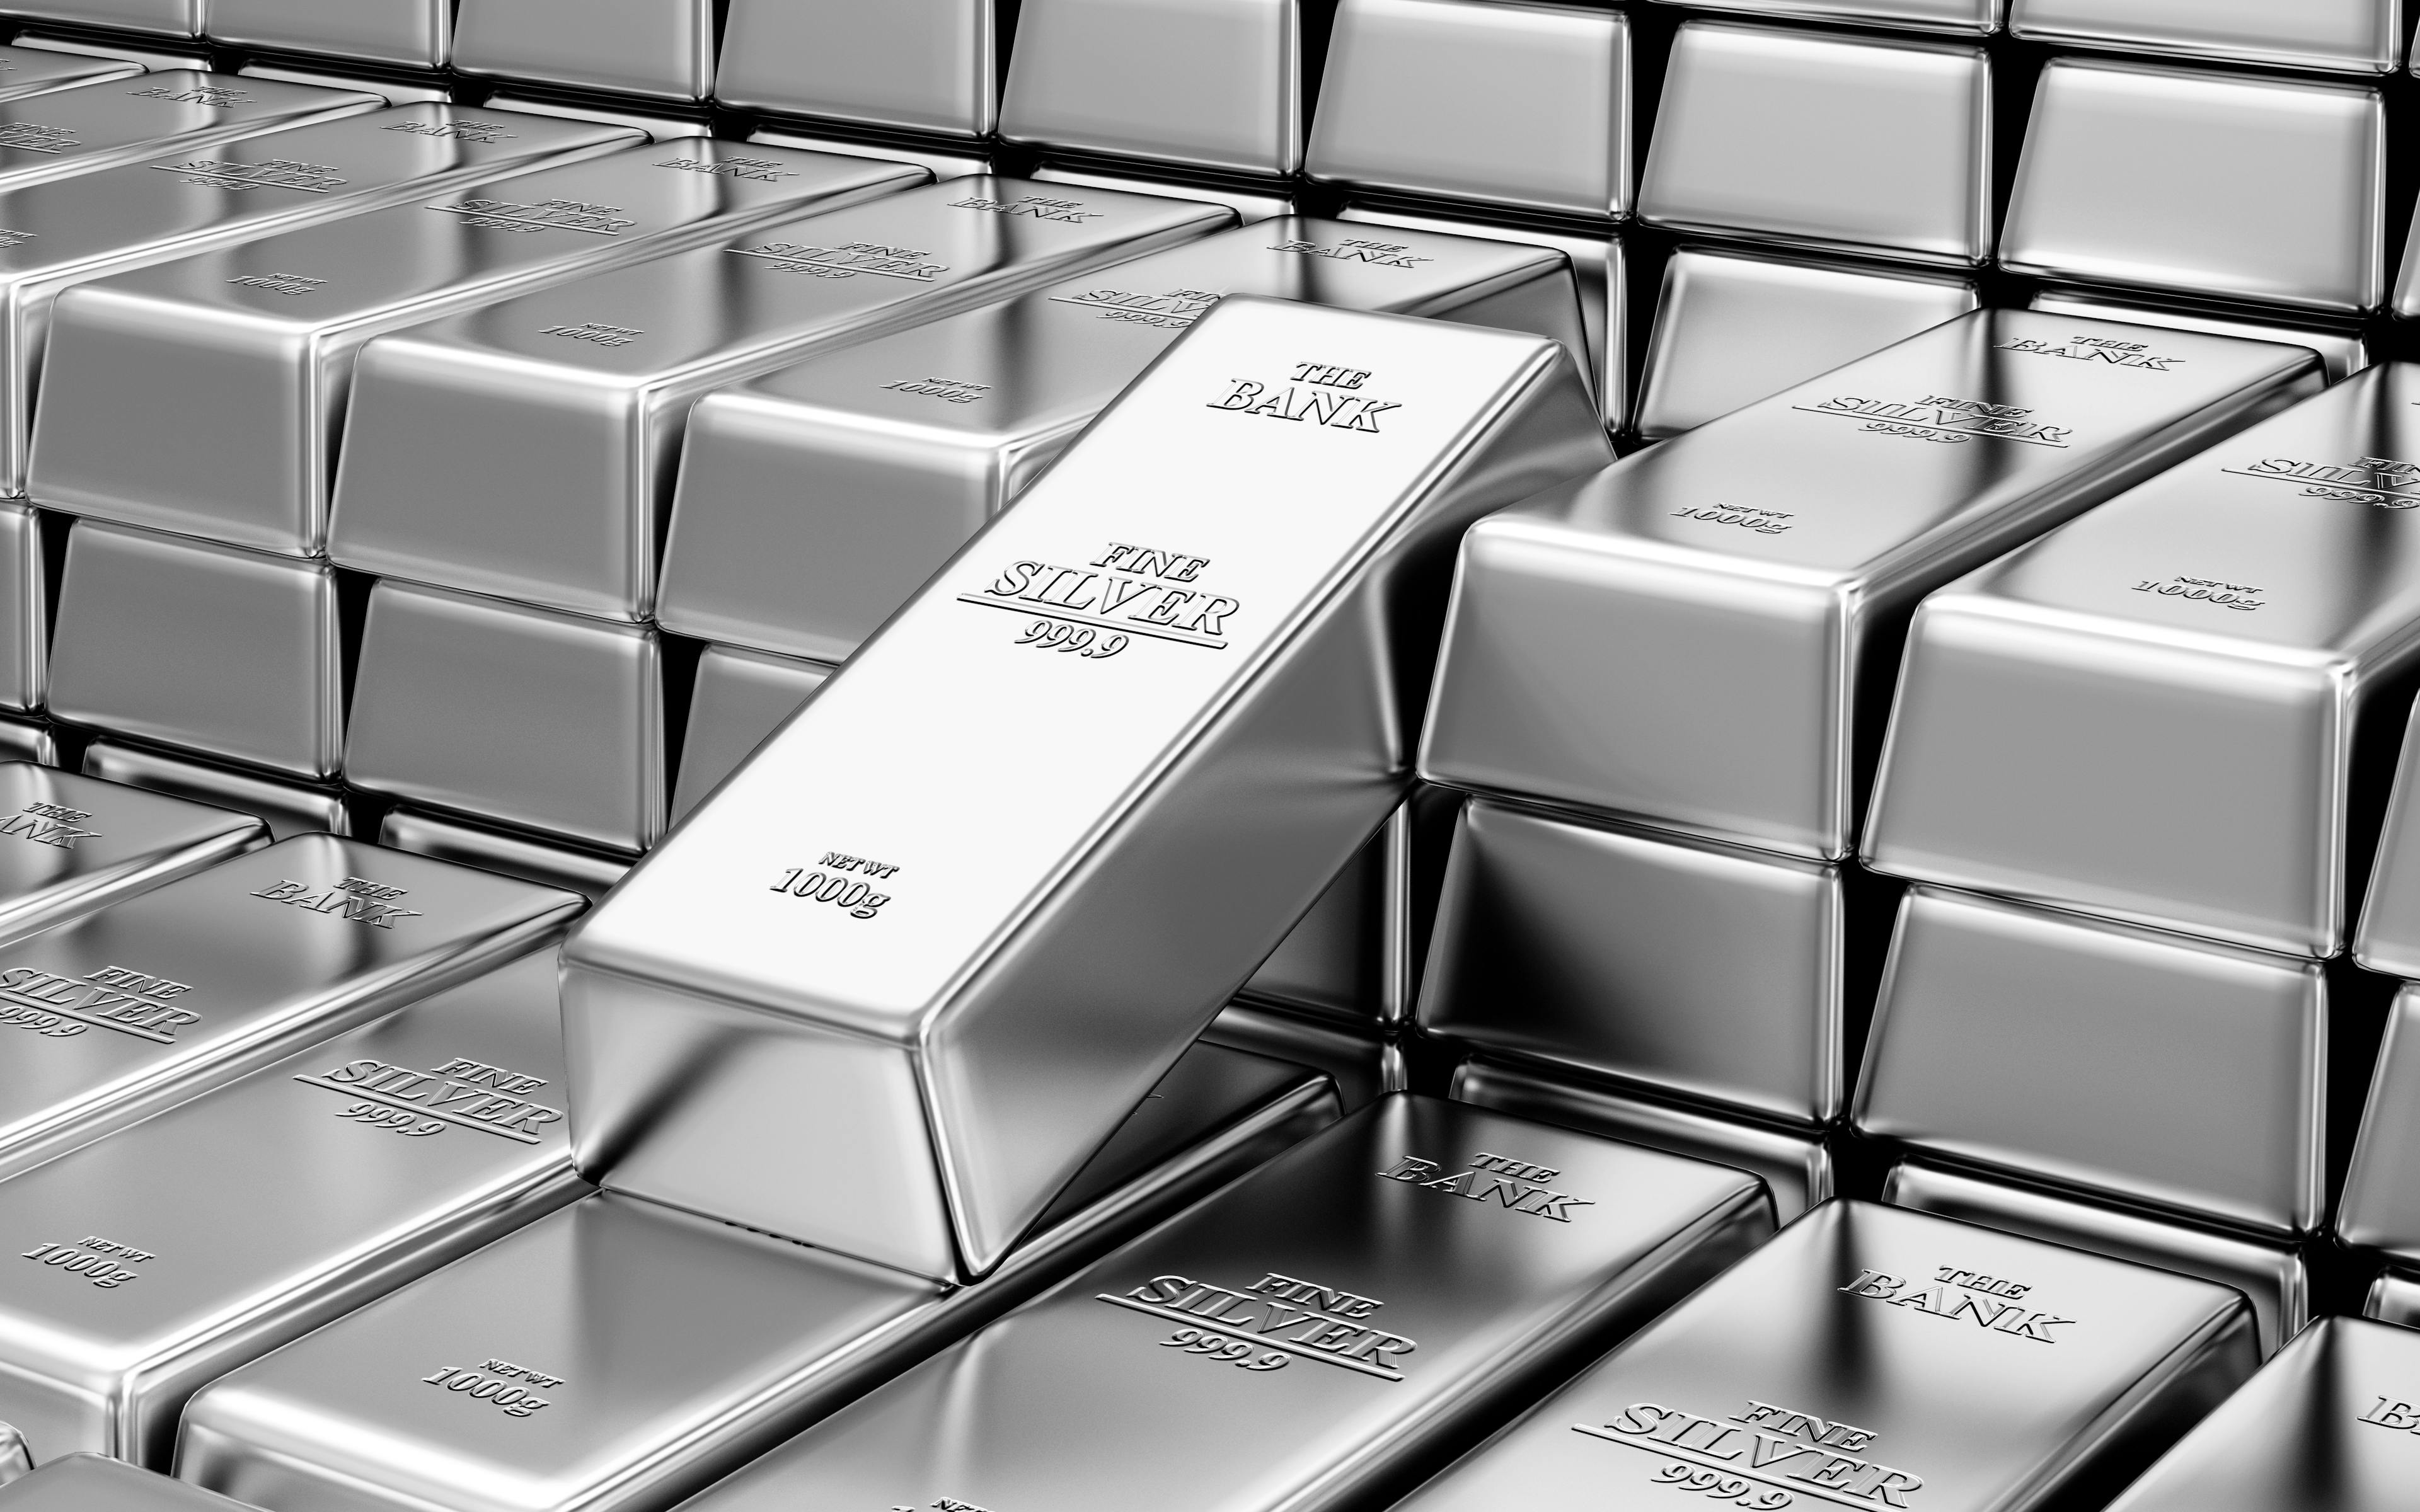 Stack of Silver Bars in the Bank Vault Abstract Background | Image Credit: © Rashevskyi Media - stock.adobe.com